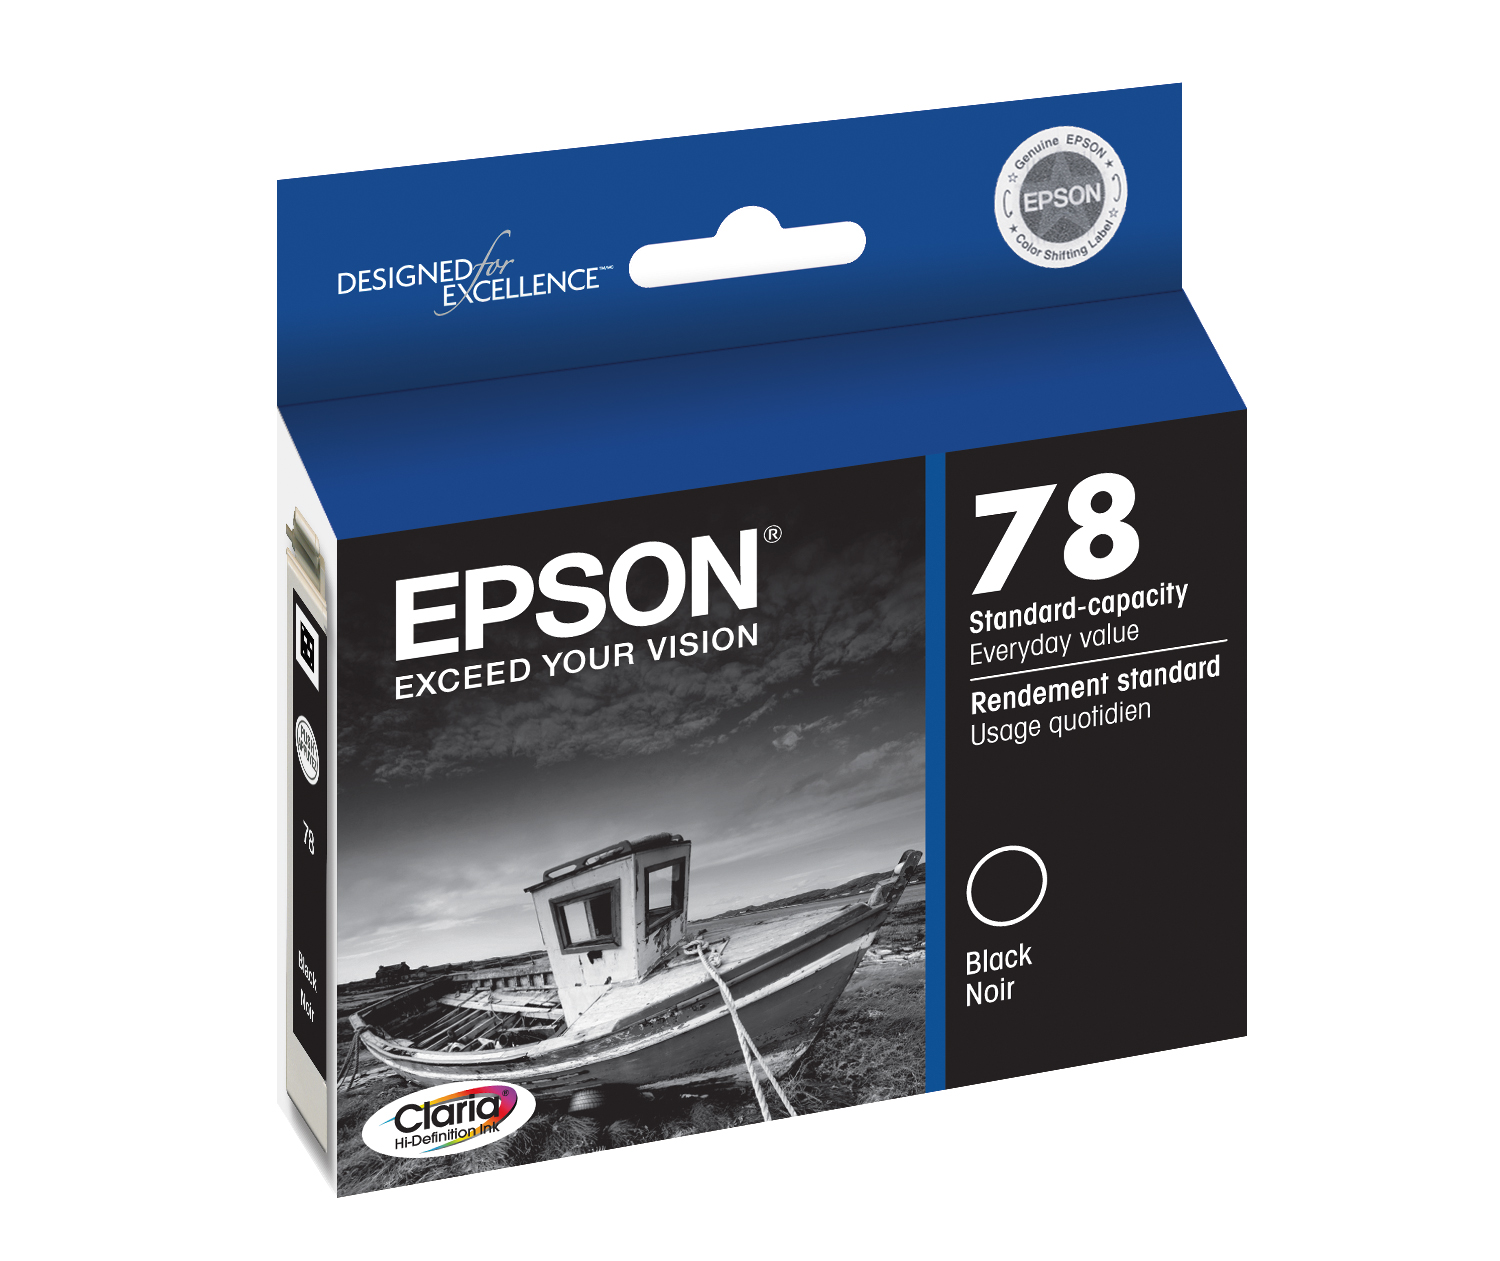 EPSON 78 Claria Hi-Definition Ink Standard Capacity Black Cartridge (T078120-S) Works with Artisan 50, Photo R260, R280, R380, RX580, RX595, RX680 - image 2 of 5